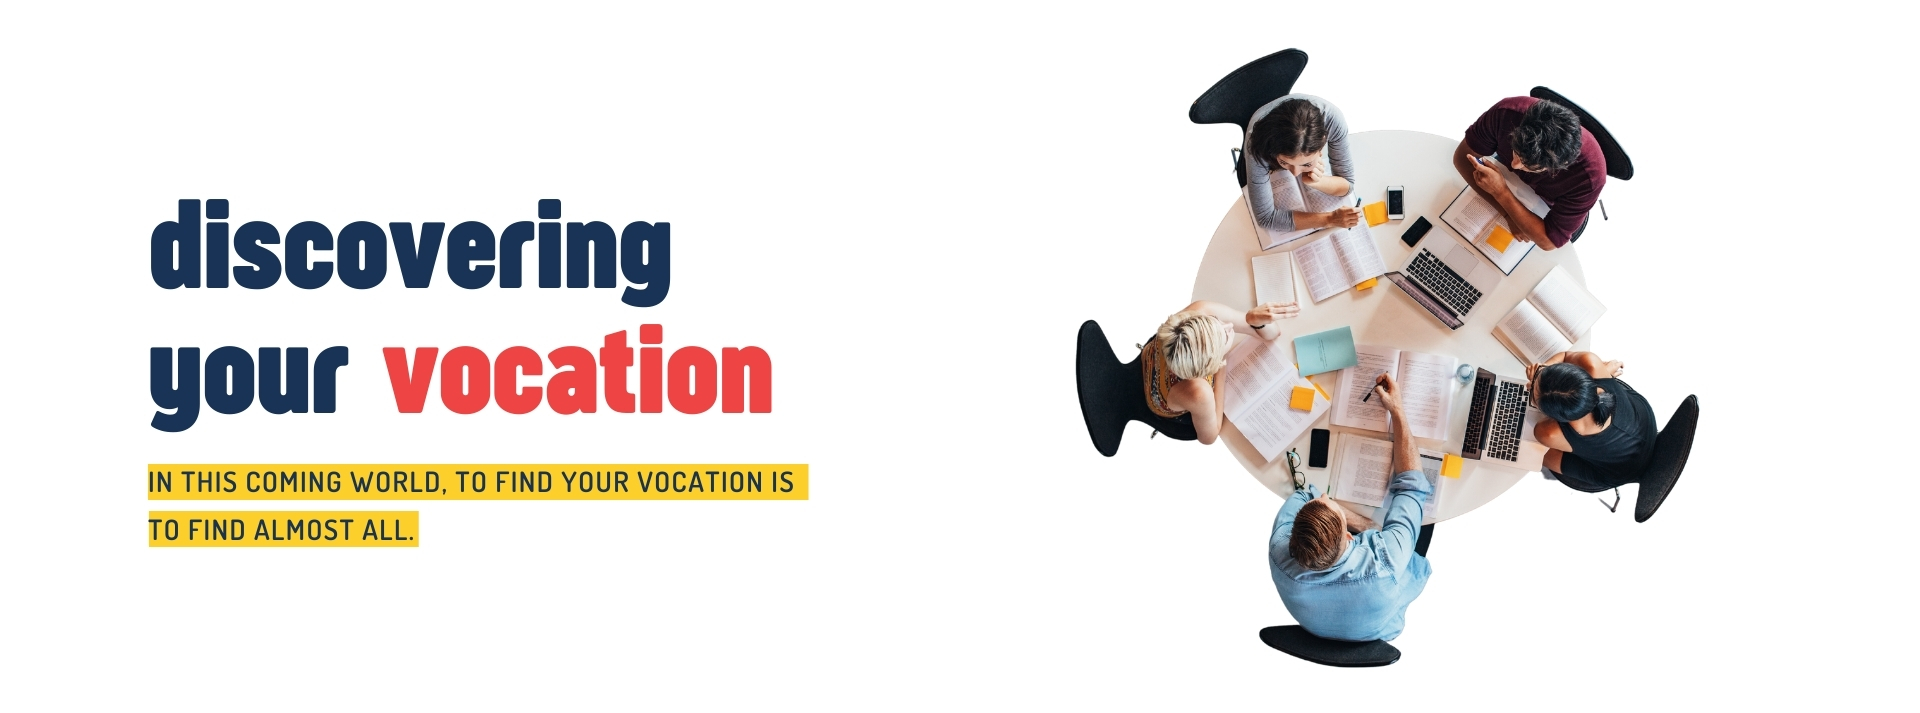 Discovering your vocation - educational tourism - spain - europroyectos